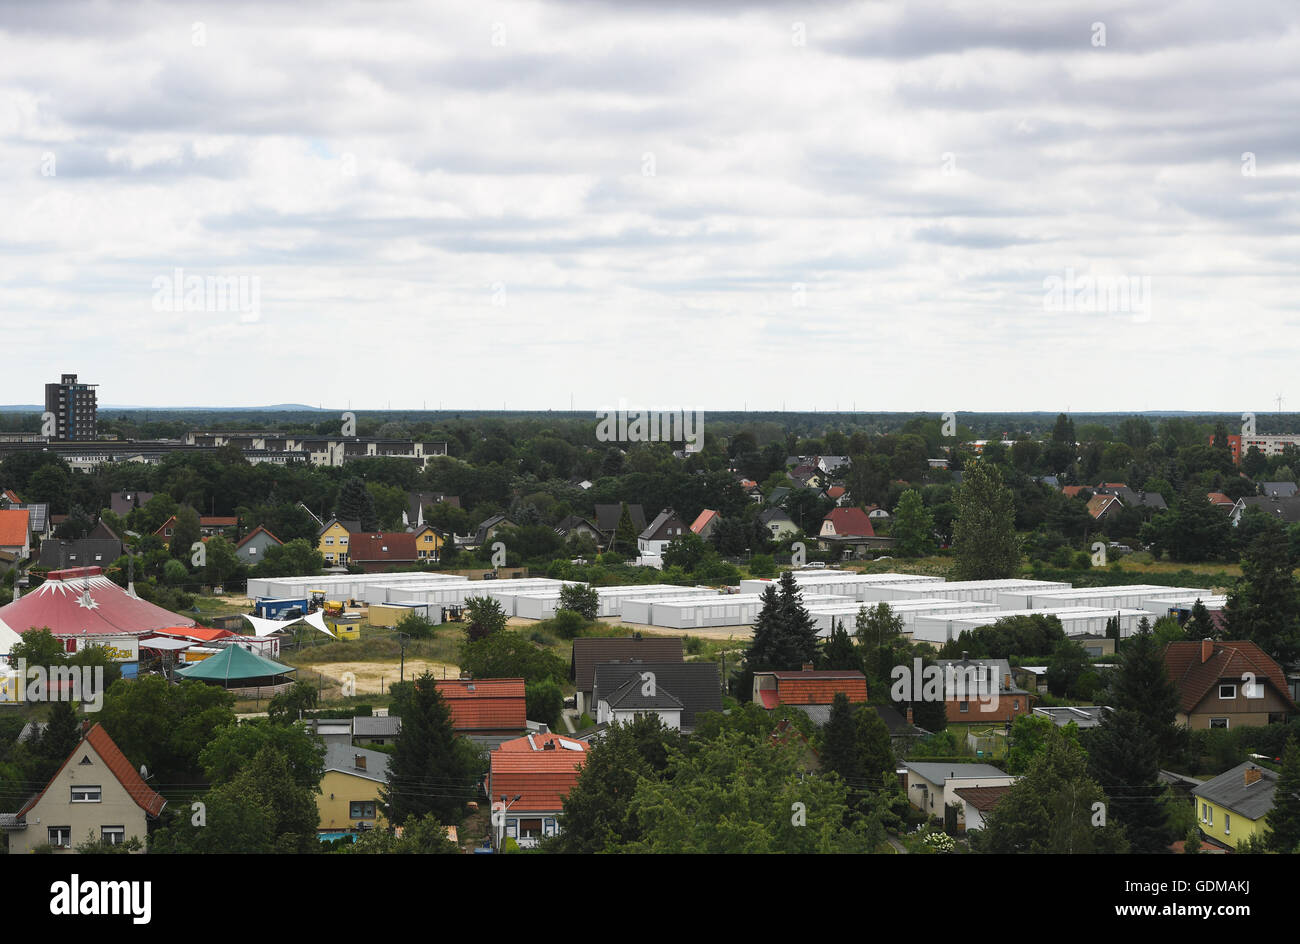 Berlin, Germany. 19th July, 2016. White containers can be seen between houses on Venus-Strasse in Berlin, Germany, 19 July 2016. The administrative court has set an appointment for an on-site visit ahead of their decision on communal accommodations for refugees in Alt-Glienicke. Photo: SOEREN STACHE/dpa/Alamy Live News Stock Photo